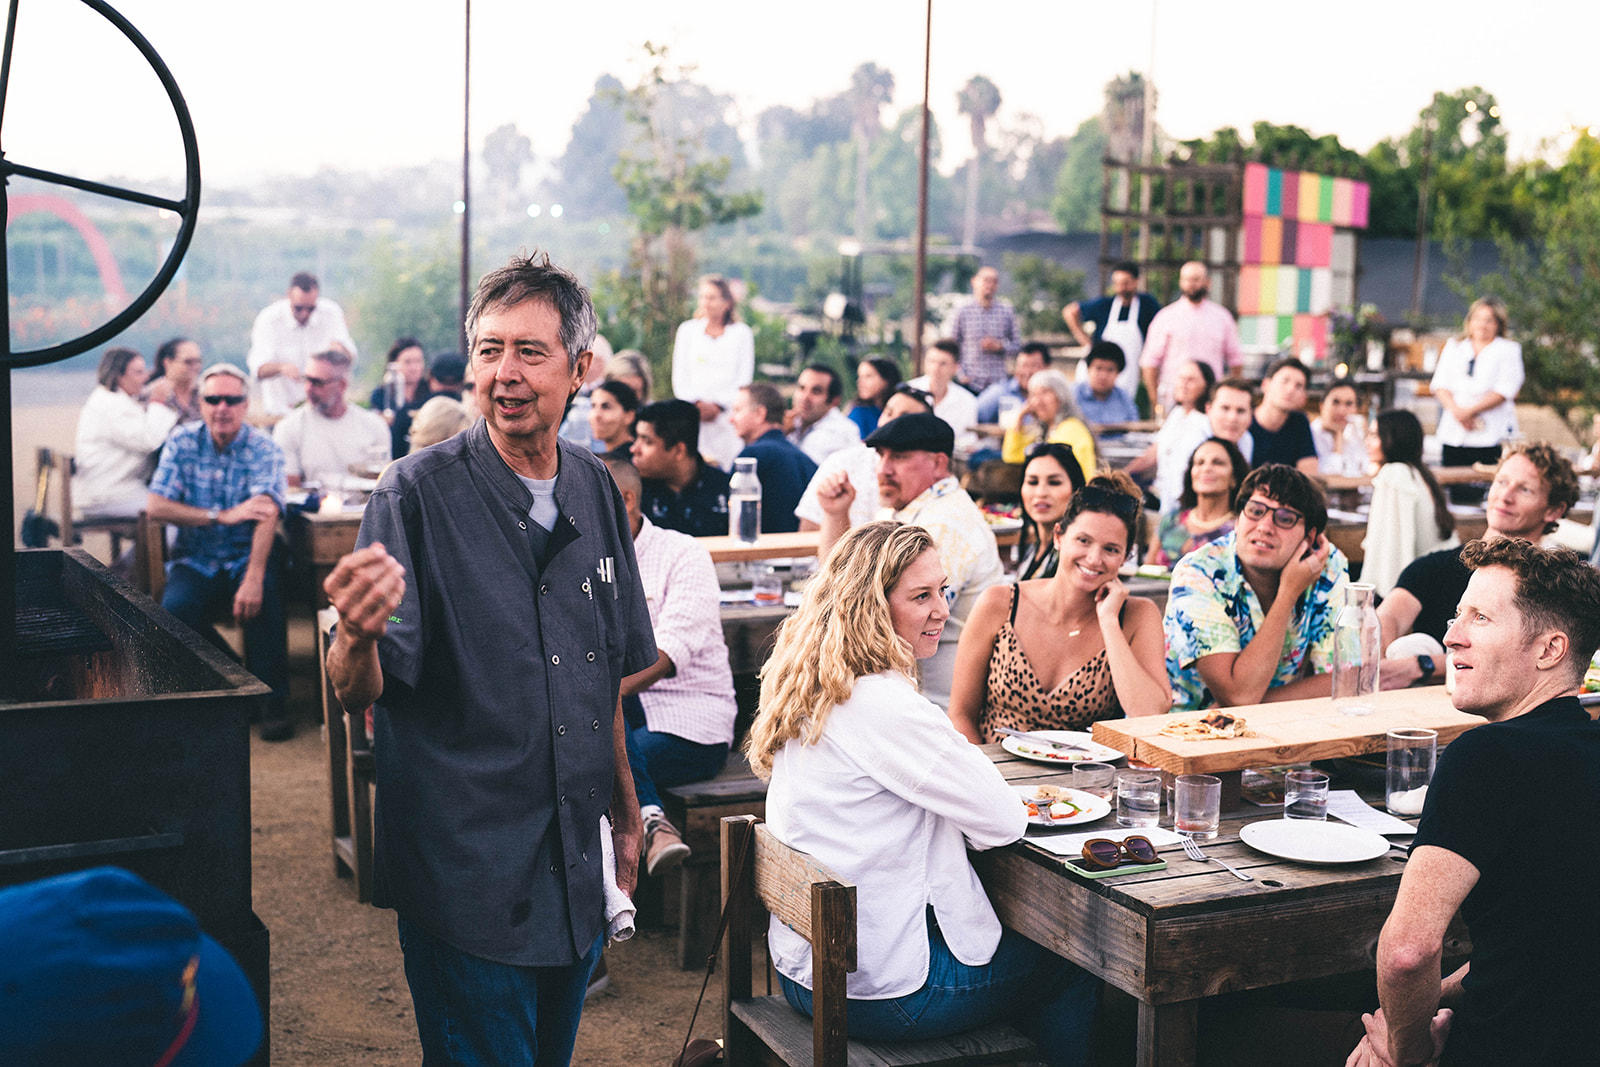 Chef Rich Mead standing in front of a crowd at a Community Table Dinner